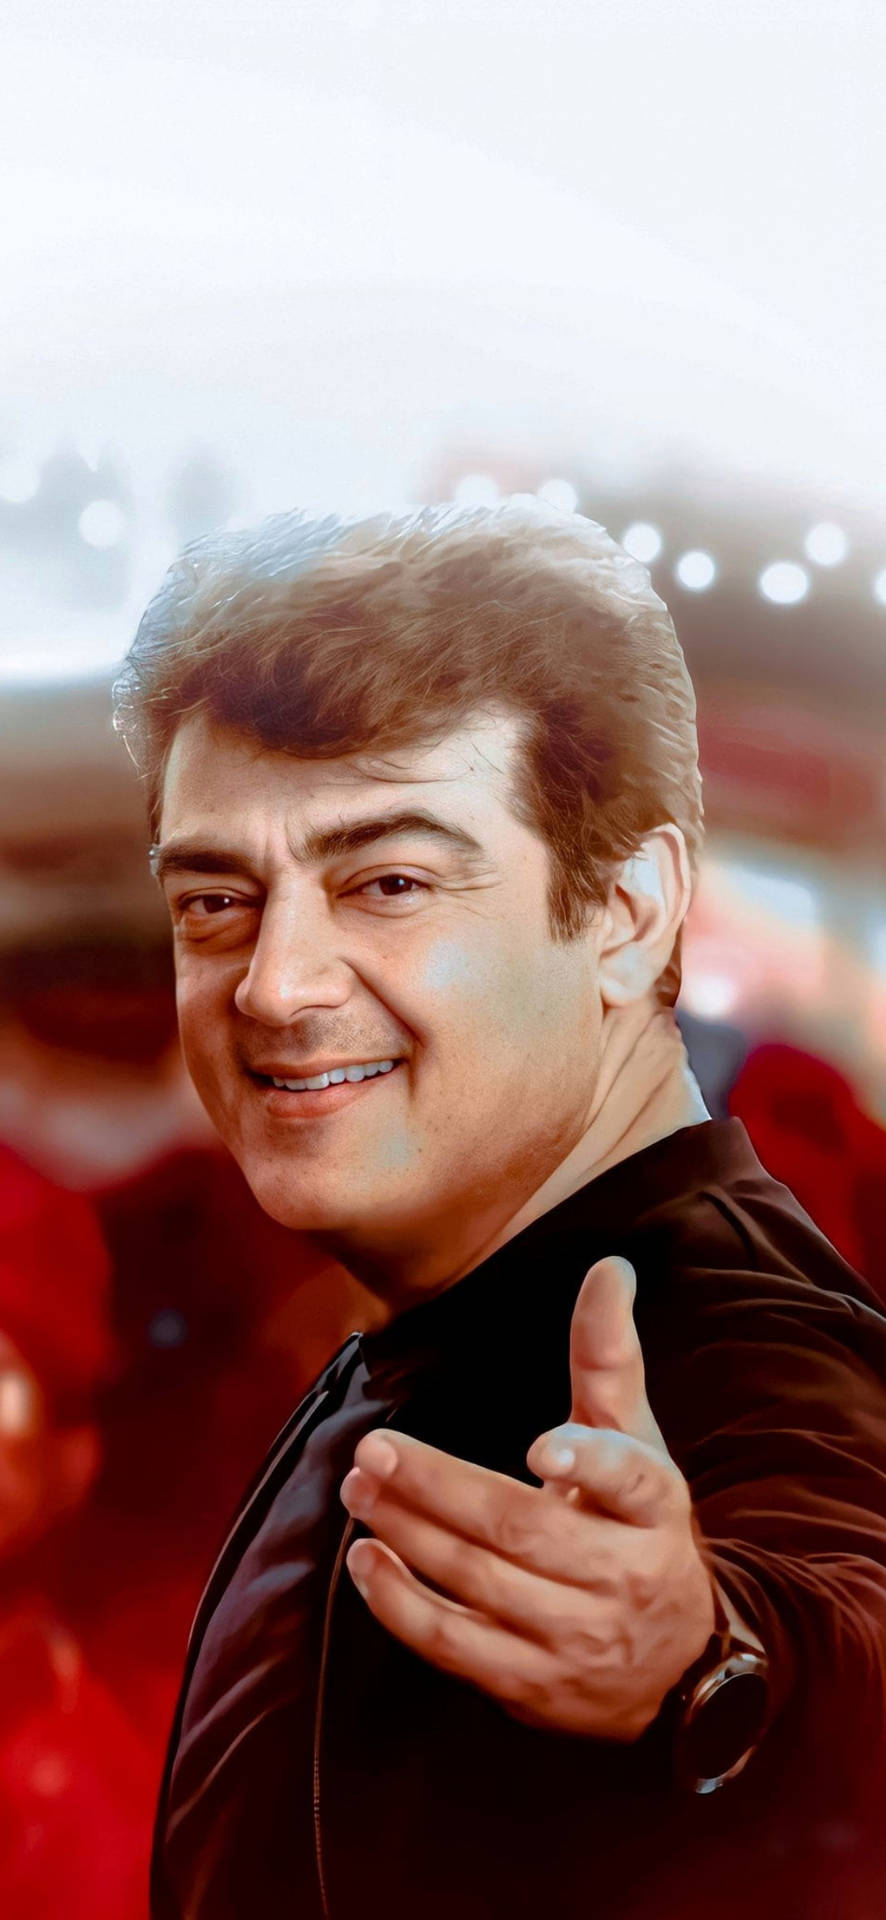 Thala Ajith's Intriguing Look from Valimai Film Wallpaper